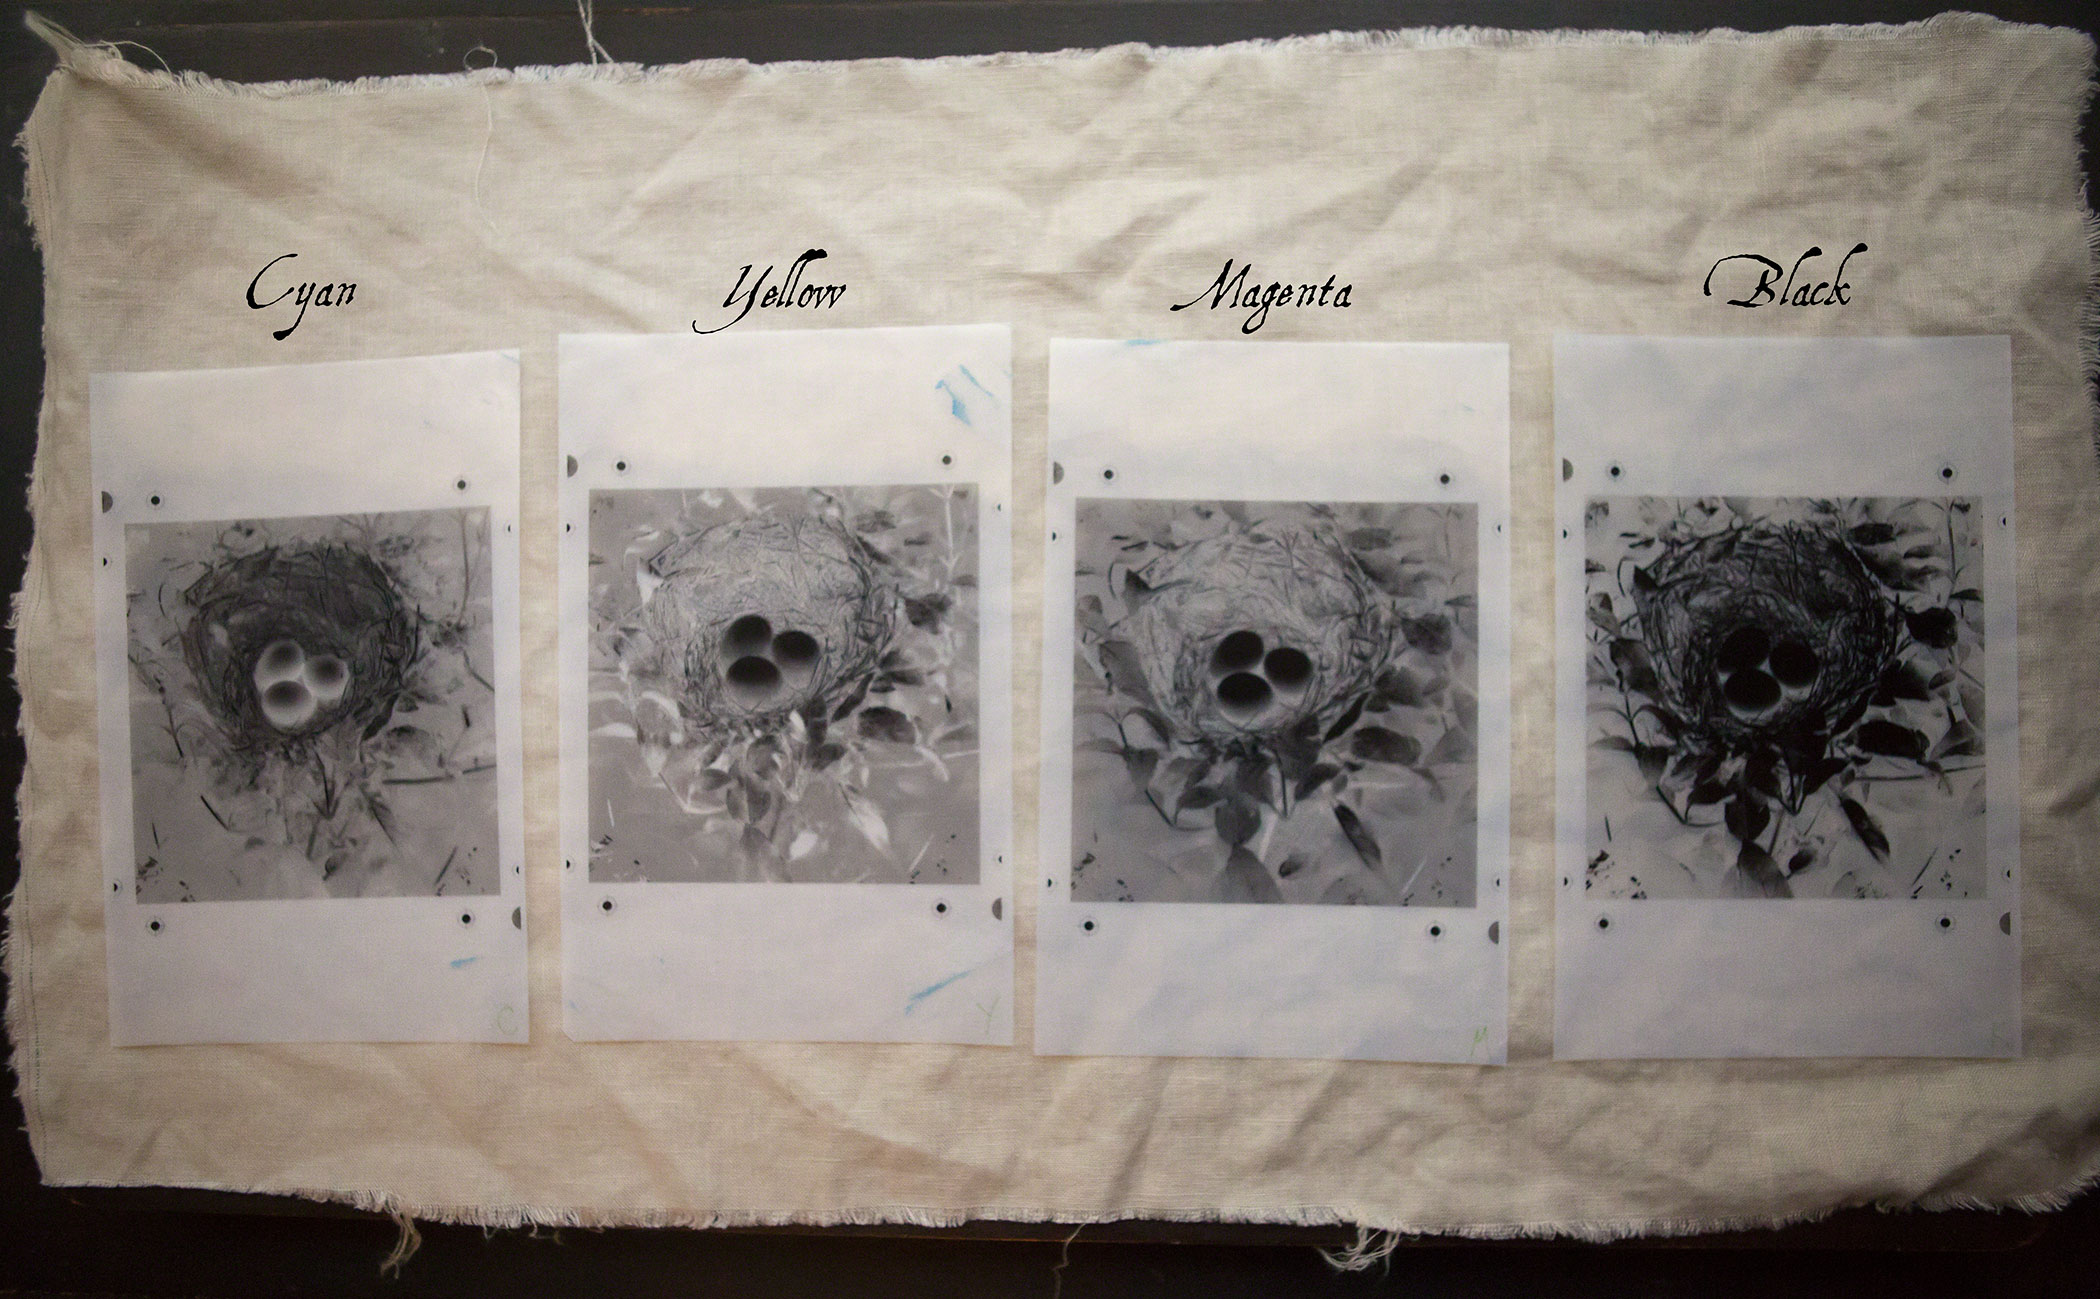  Separation negatives: Cyan, Yellow, Magenta and Black  Each one is slightly different to allow varying degrees of pigment to be exposed for the image 